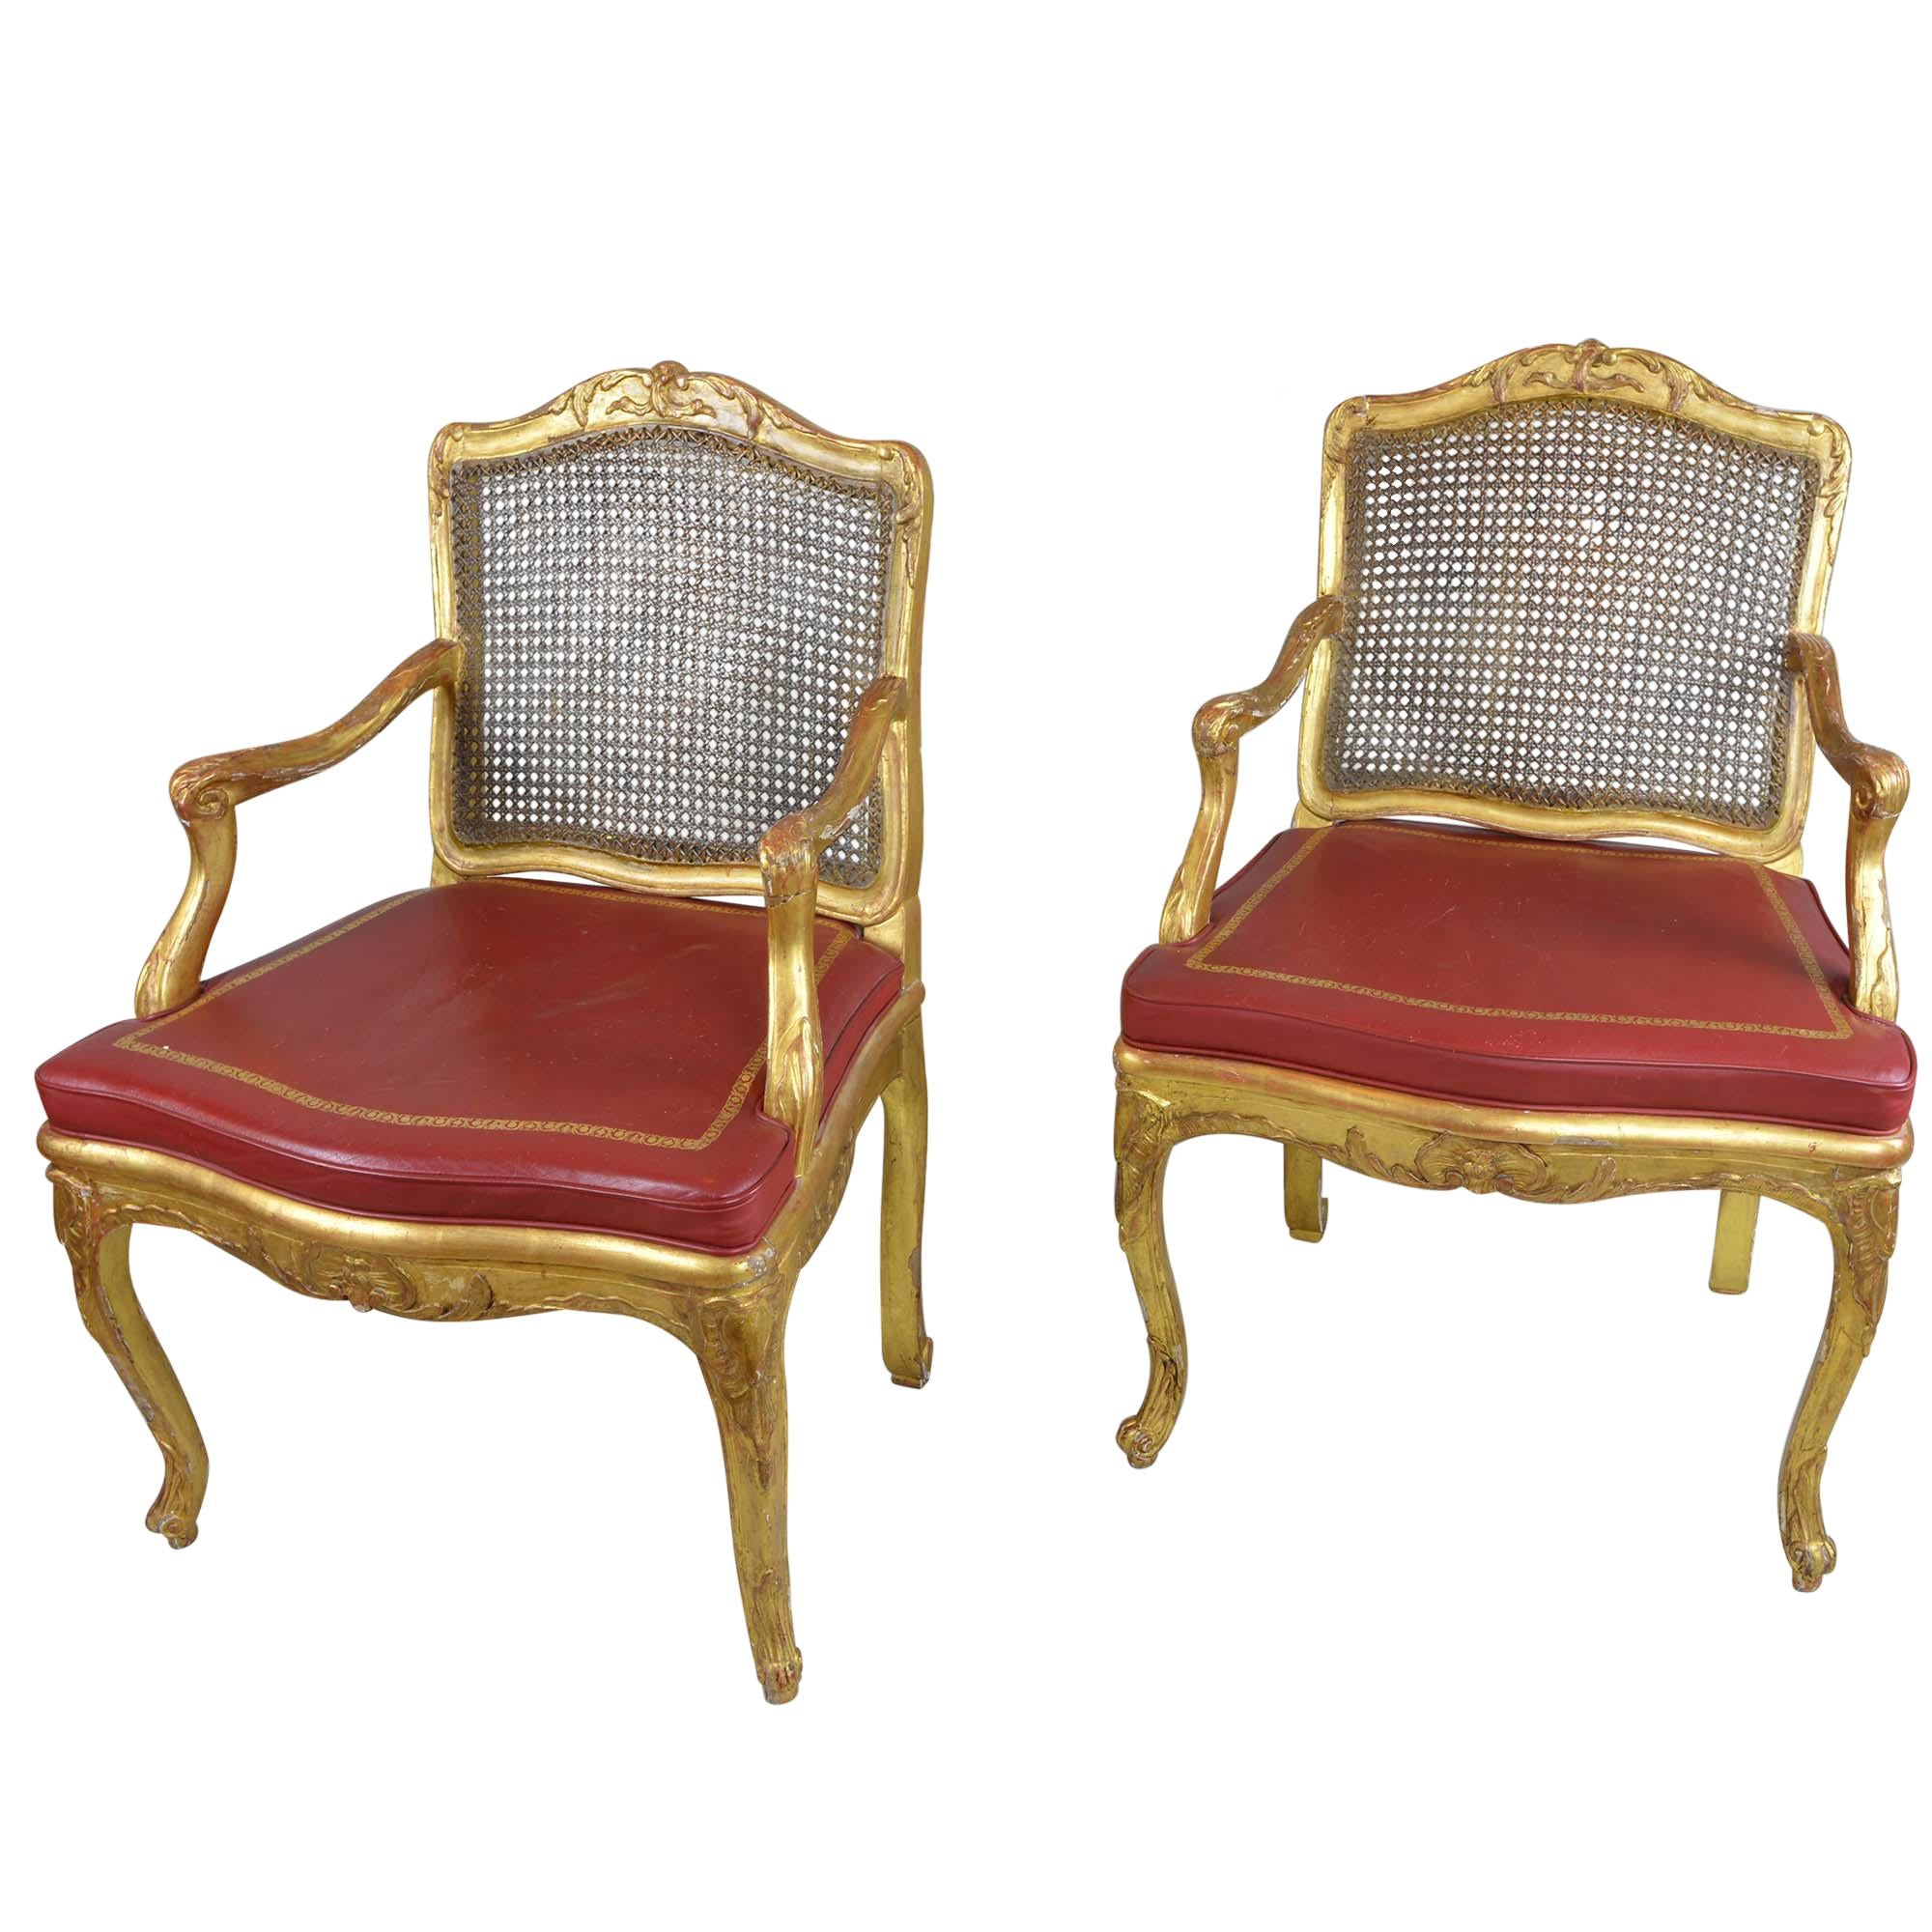 Pair of Antique Gilded Wood Regency Chairs with Red Leather Cushions For Sale